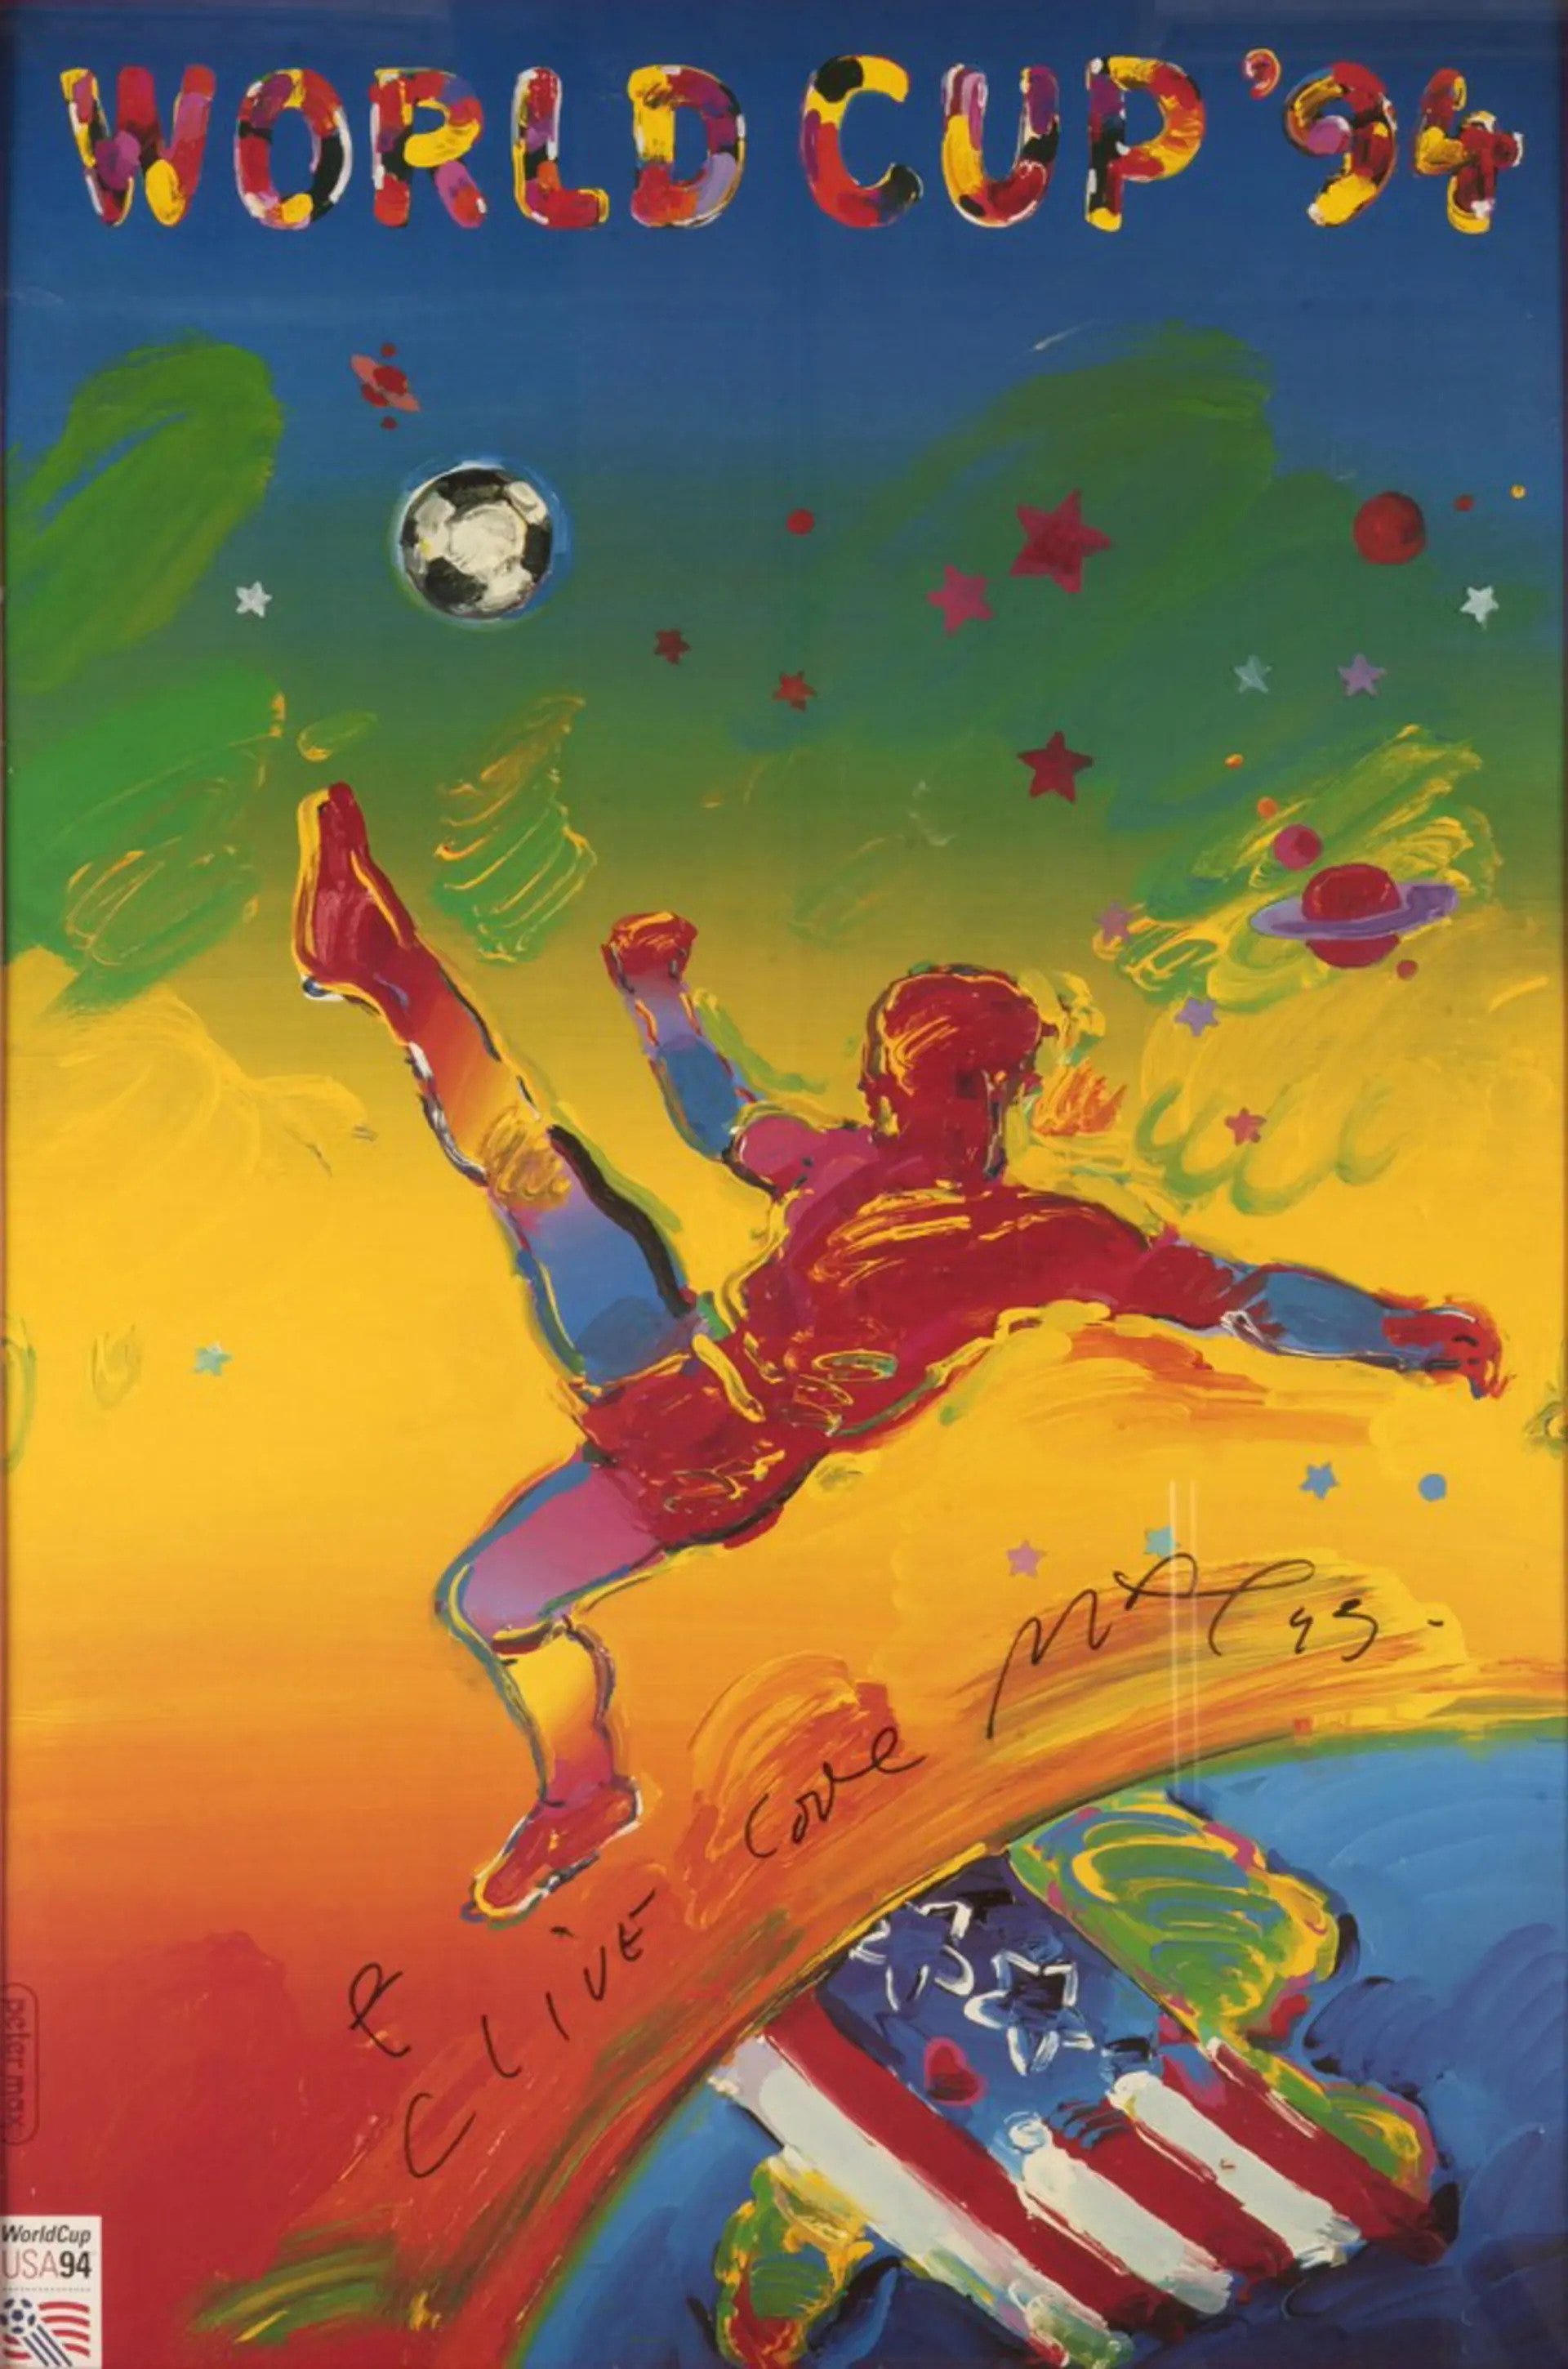 2022 fifa world cup poster